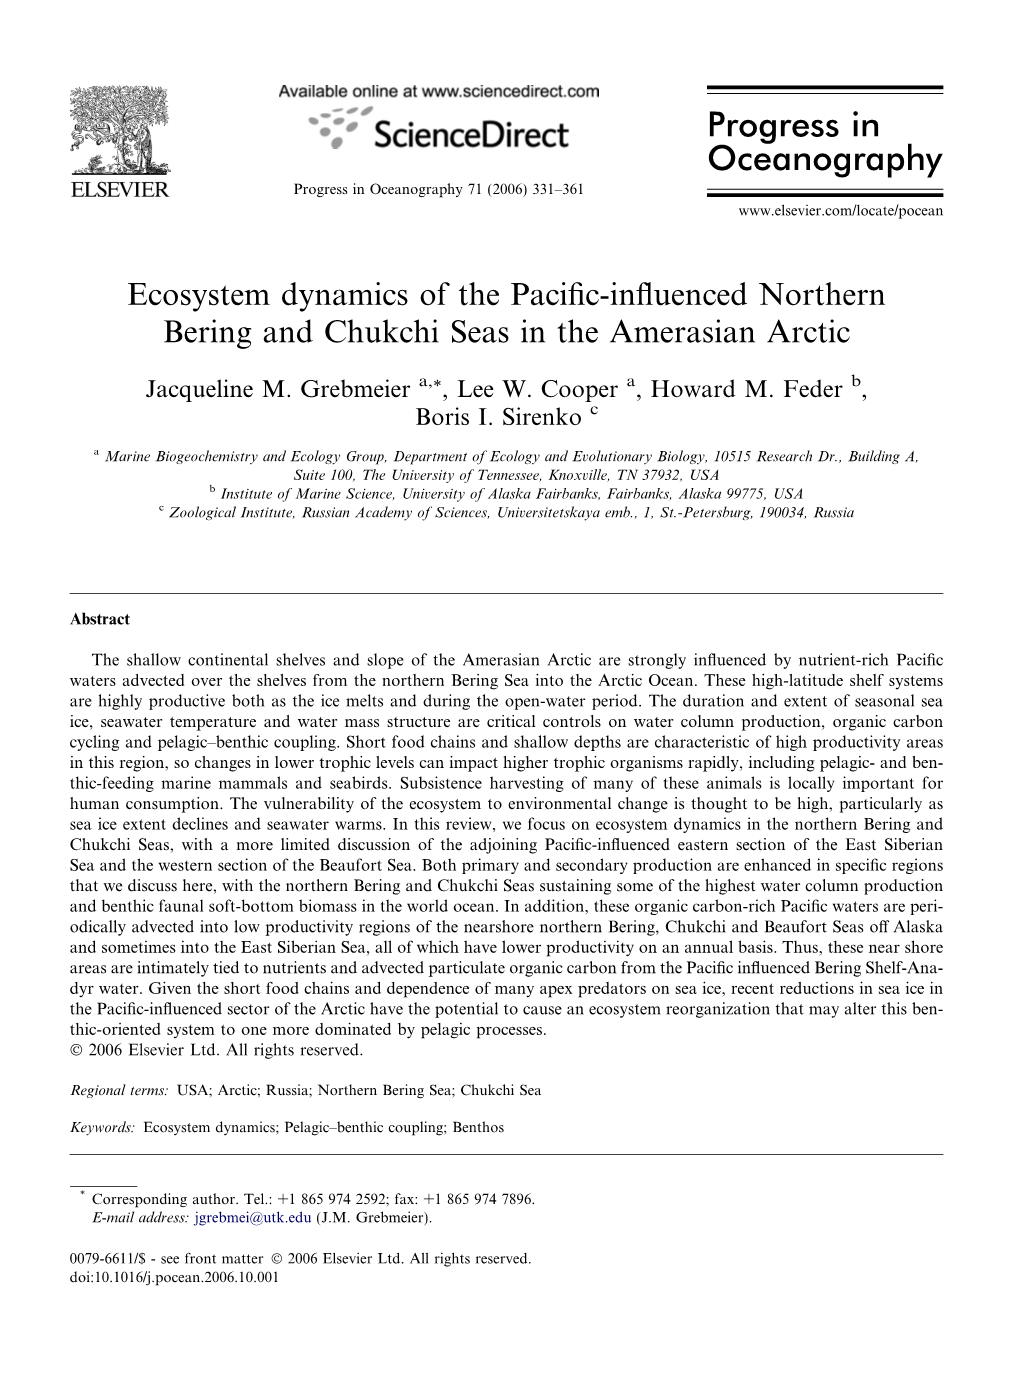 Ecosystem Dynamics of the Pacific-Influenced Northern Bering